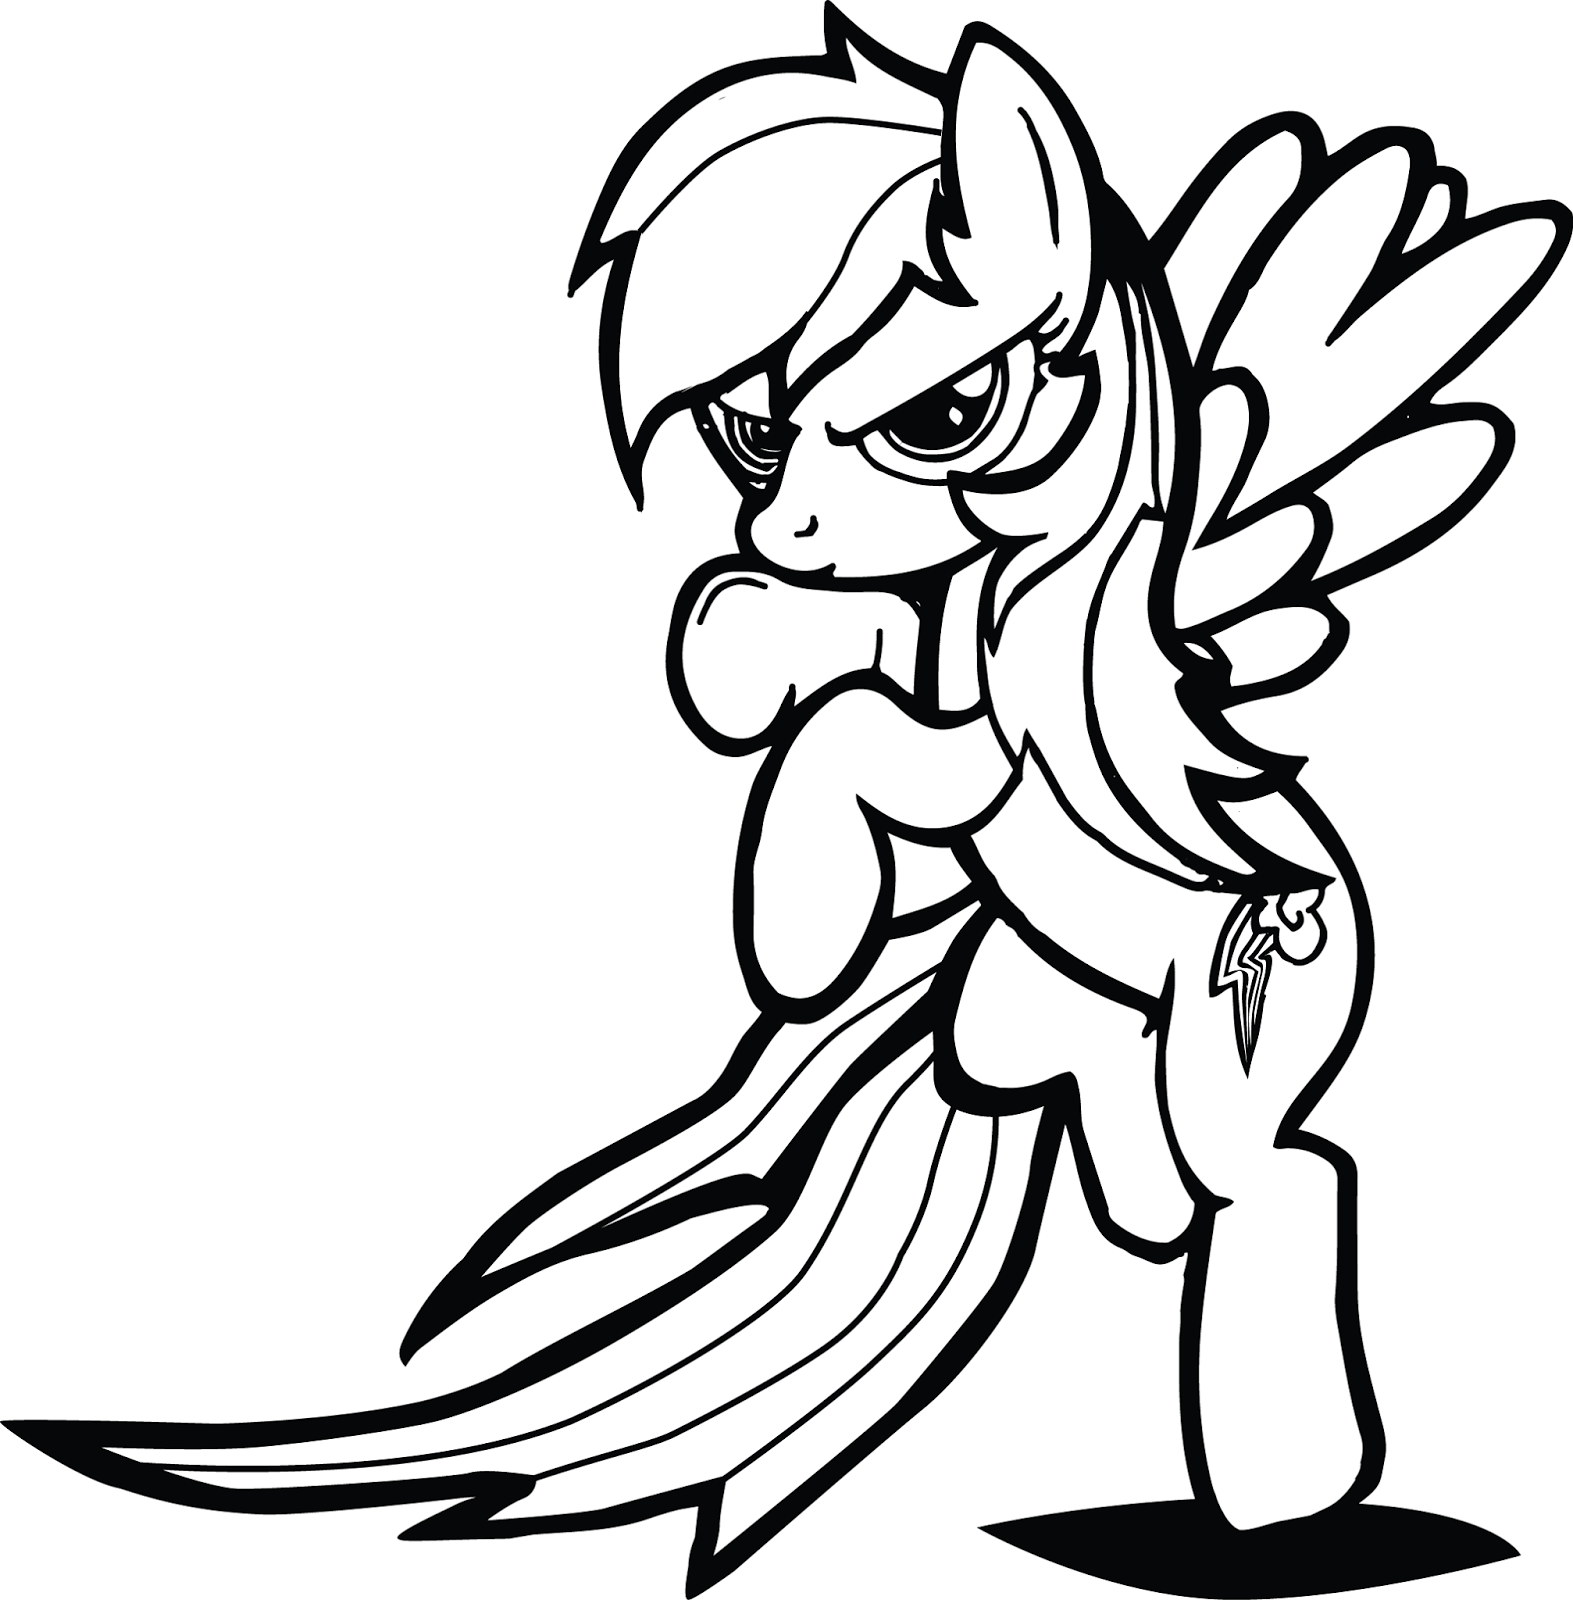 Rainbow Dash Coloring Page Free download on ClipArtMag